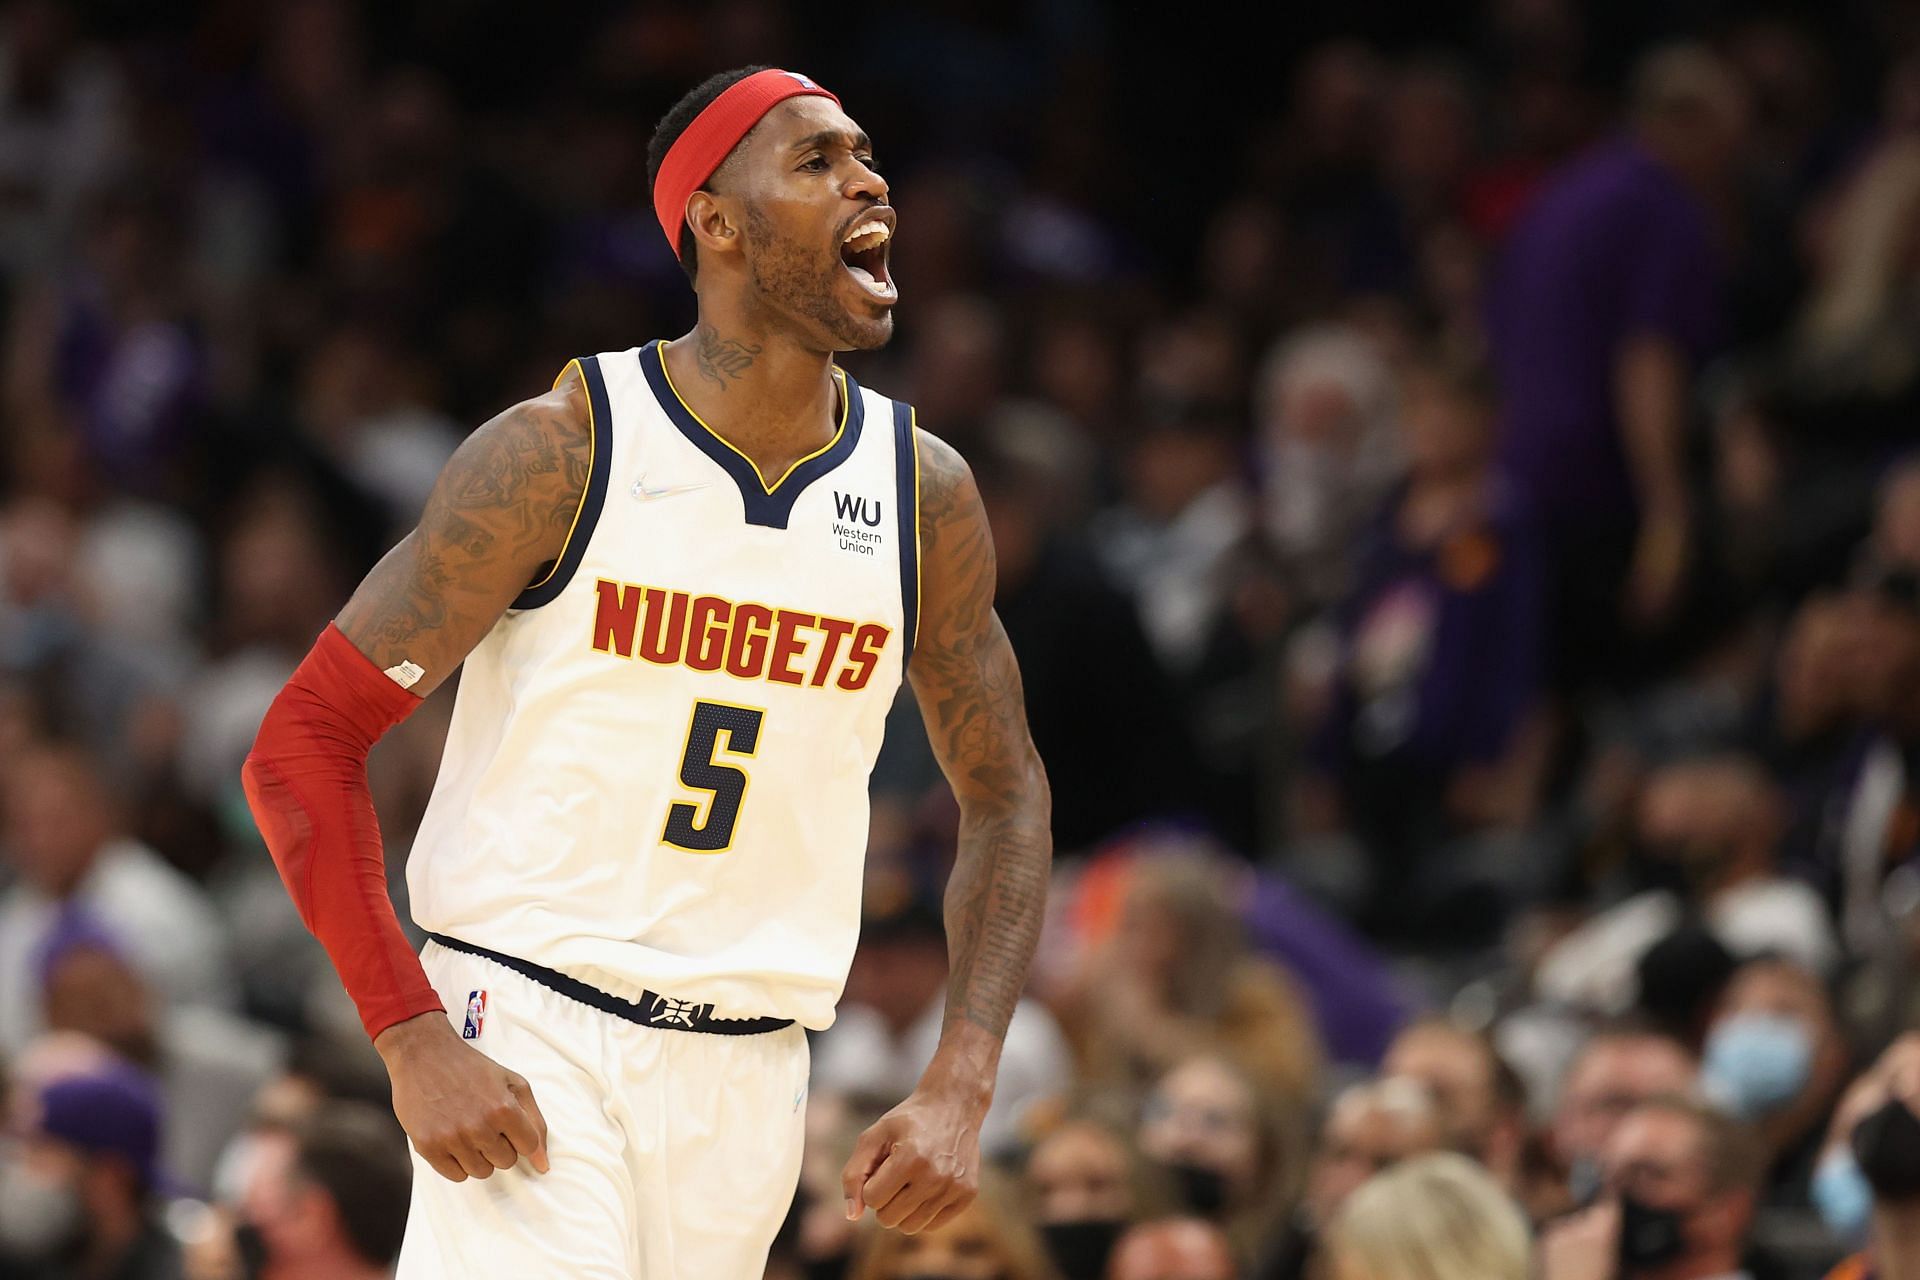 Will Barton #5 of the Denver Nuggets reacts after a three-point shot against the Phoenix Suns during the second half of the NBA game at Footprint Center on October 20, 2021 in Phoenix, Arizona.